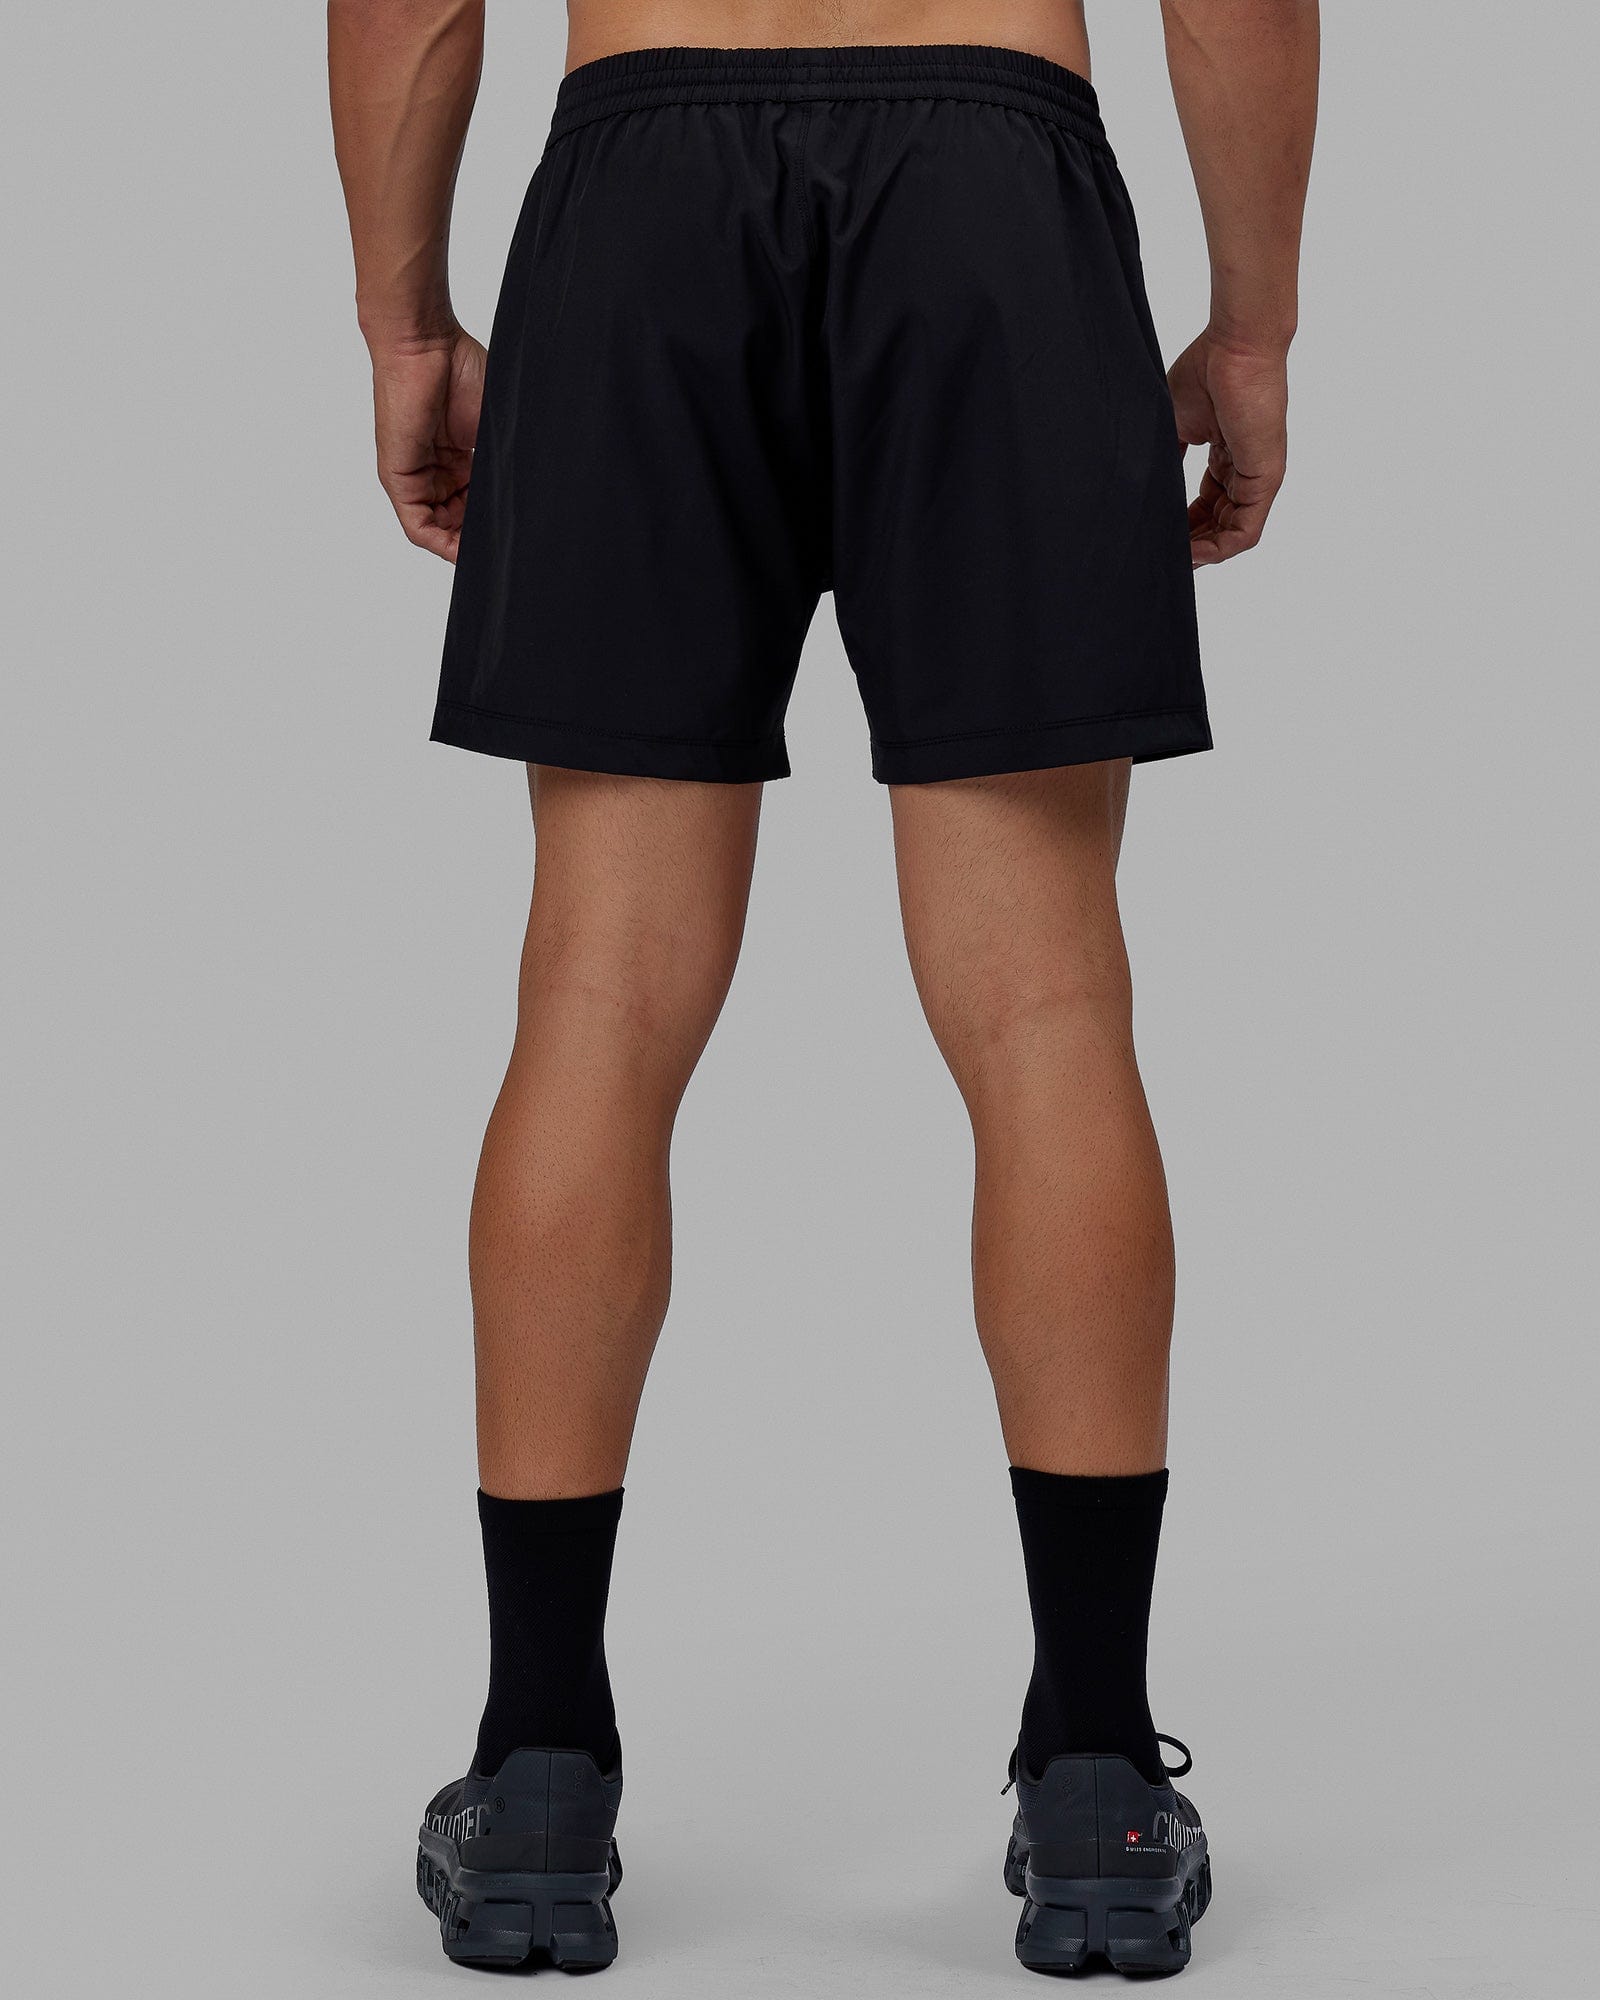 Rep 5 Lined Performance Shorts - Black